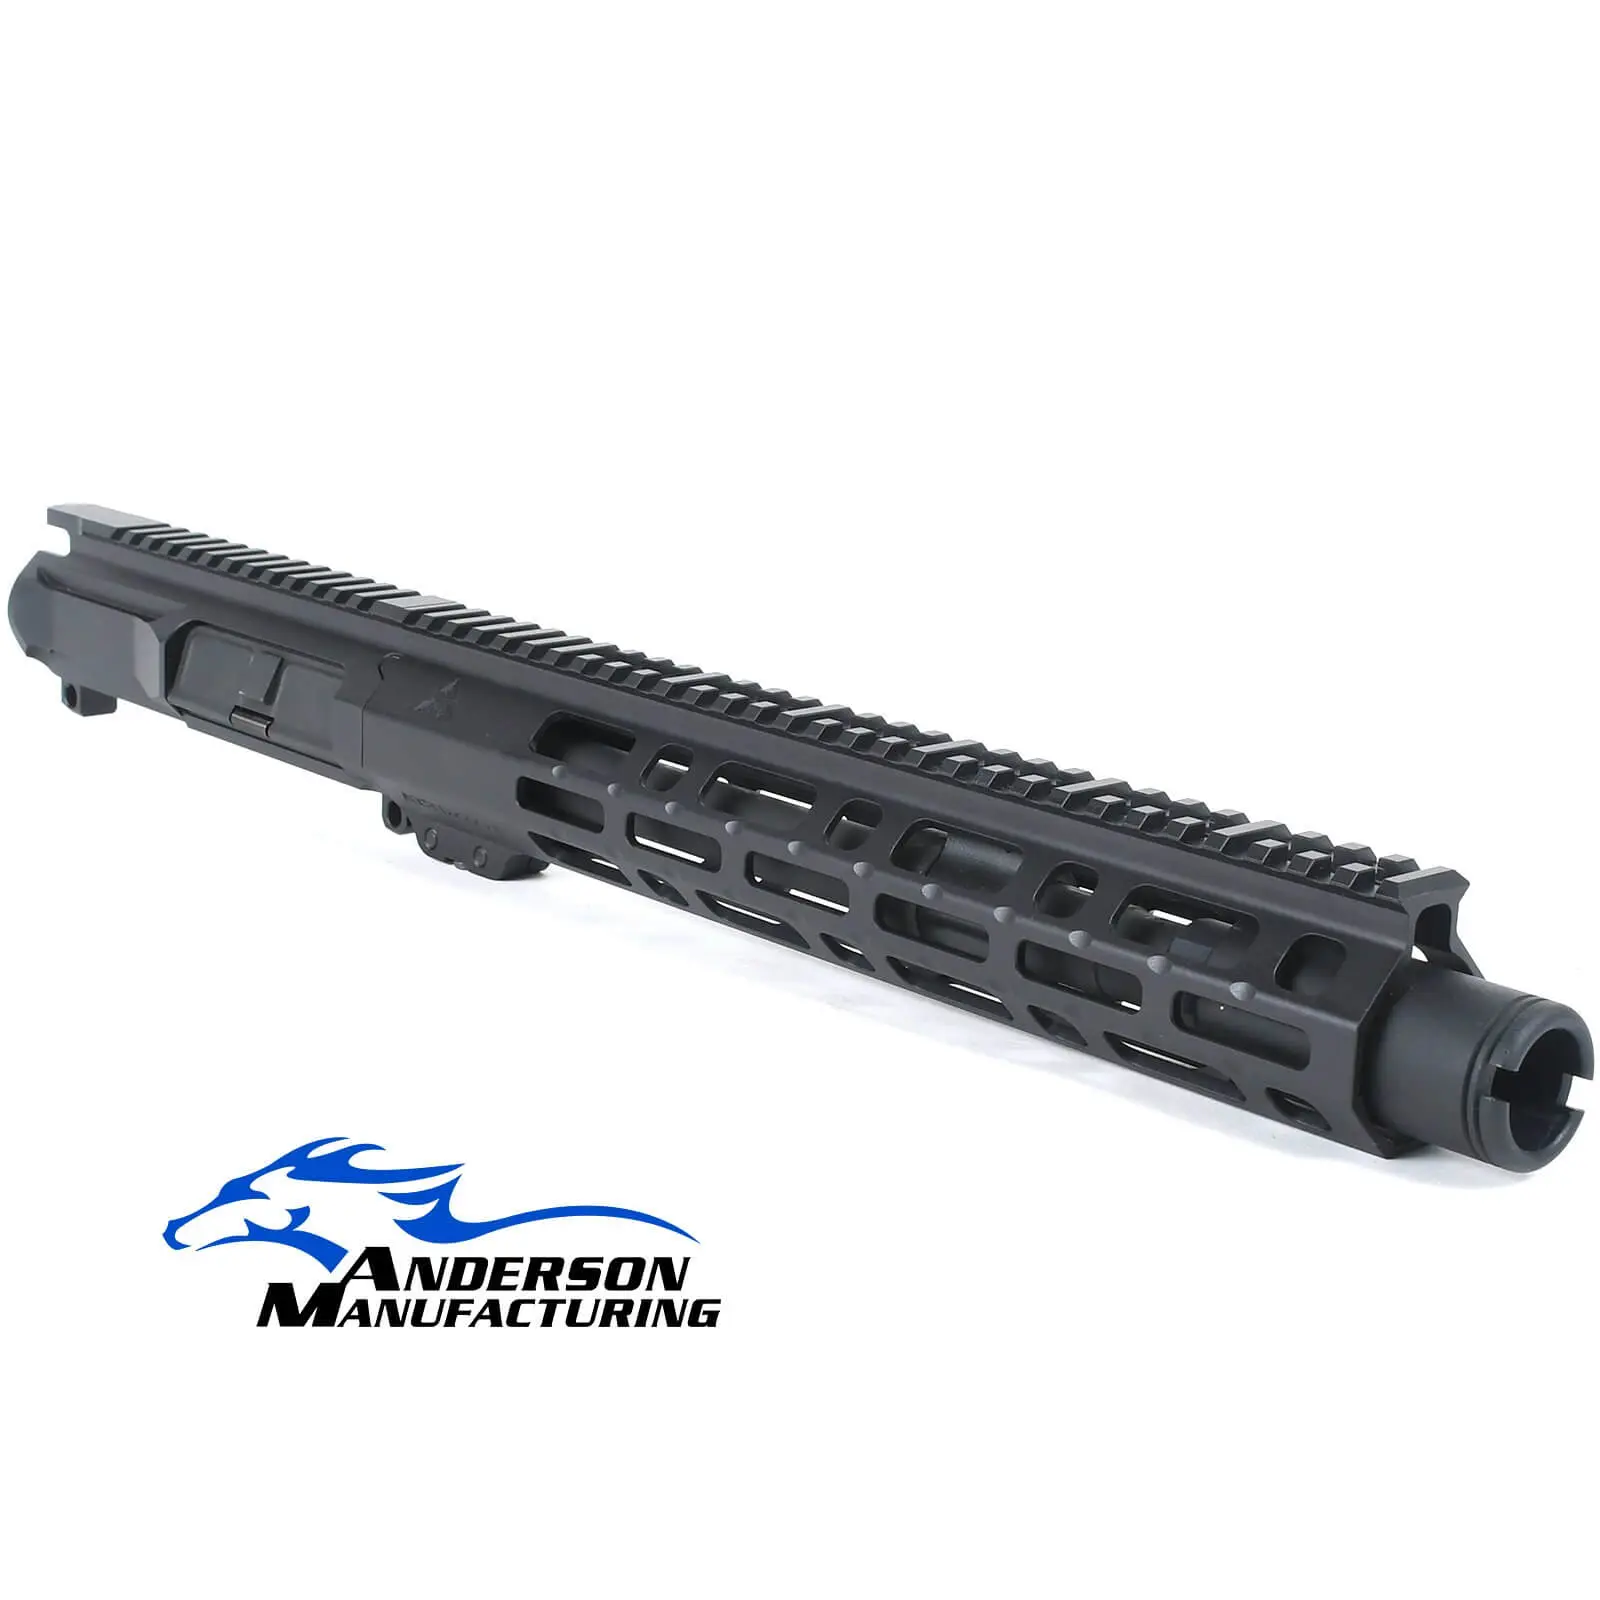 AT3™ FF-ML 10.5″ Complete AR 15 Pistol Upper – Choose Your Own 10.5 inch .223/5.56 Barrel